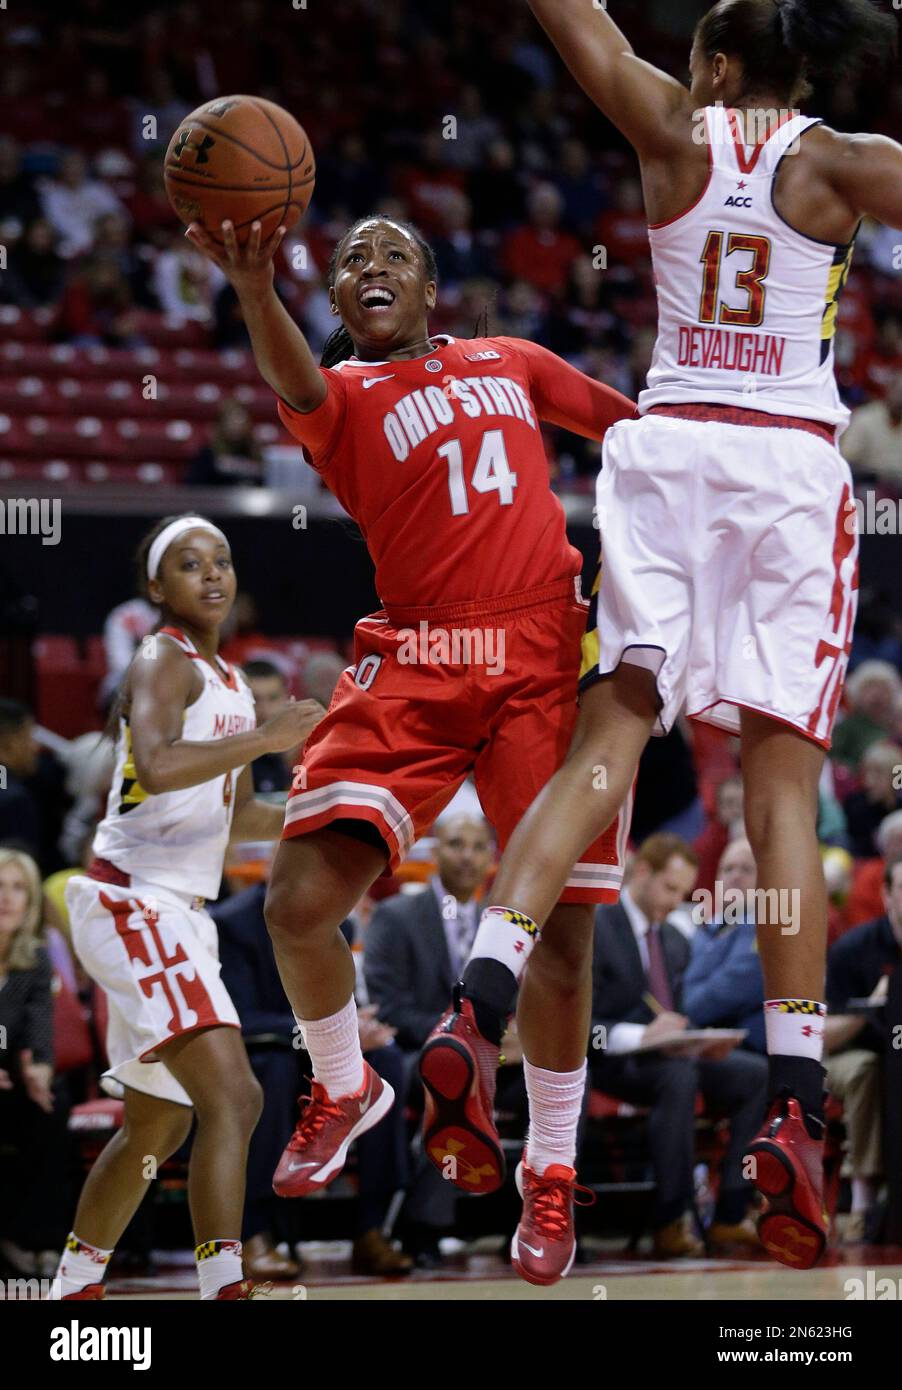 Ohio State guard Ameryst Alston (14) shoots between Maryland guard Lexie Brown, back, and center Alicia DeVaughn in the first half of an NCAA college basketball game in College Park, Md., Wednesday, Dec. 4, 2013. (AP Photo/Patrick Semansky) Stock Photo